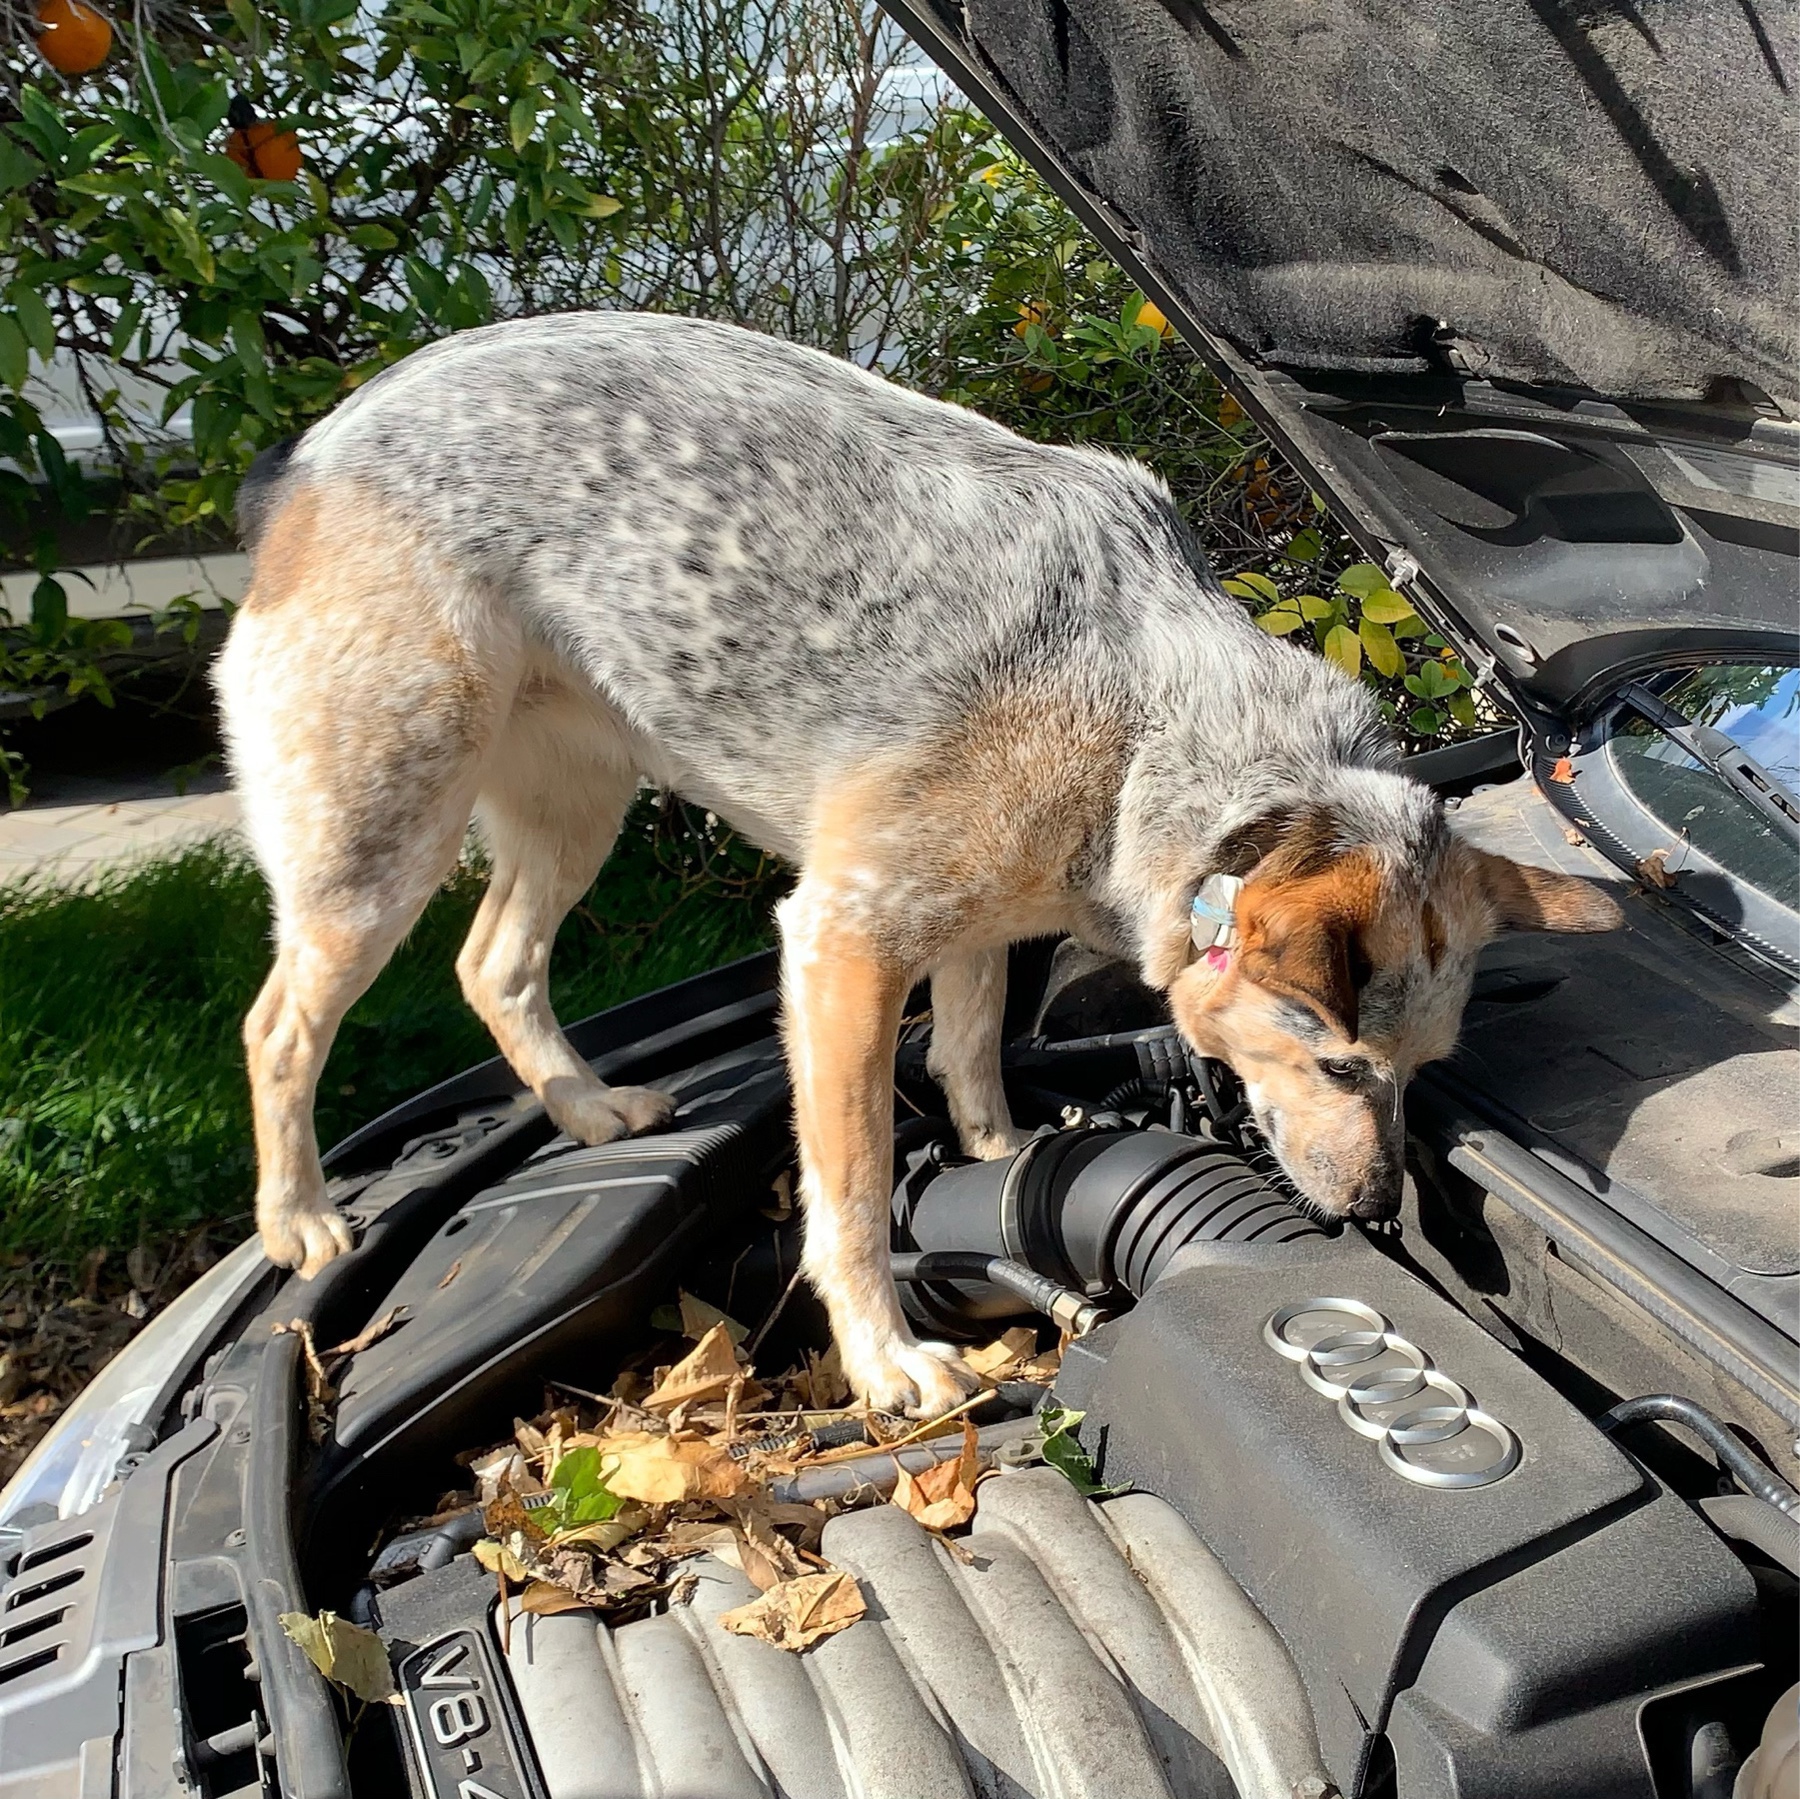 small cattle dog standing on a car engine, under an open hood